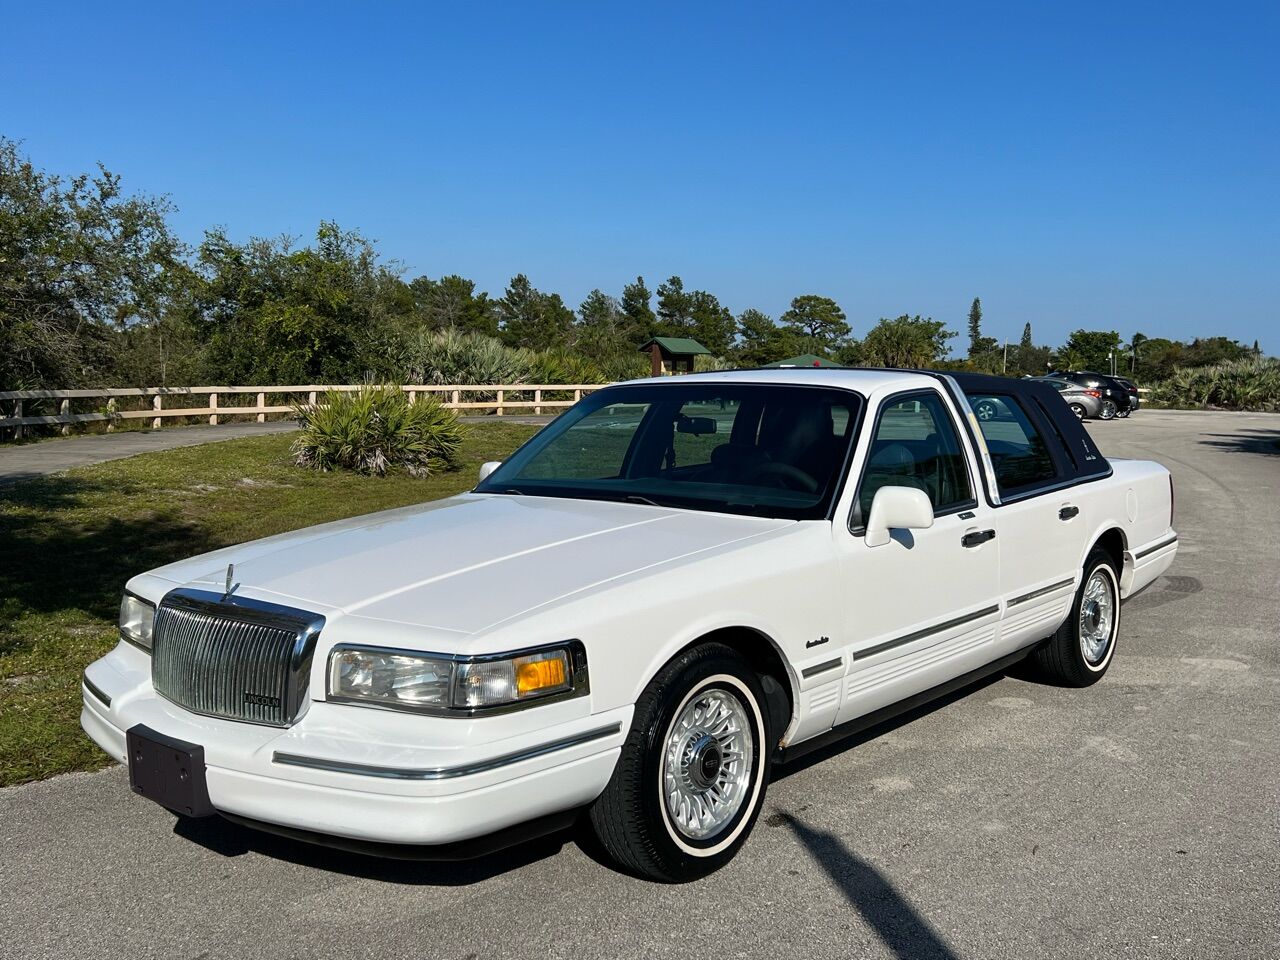 1997 Lincoln Town Car For Sale - Carsforsale.com®